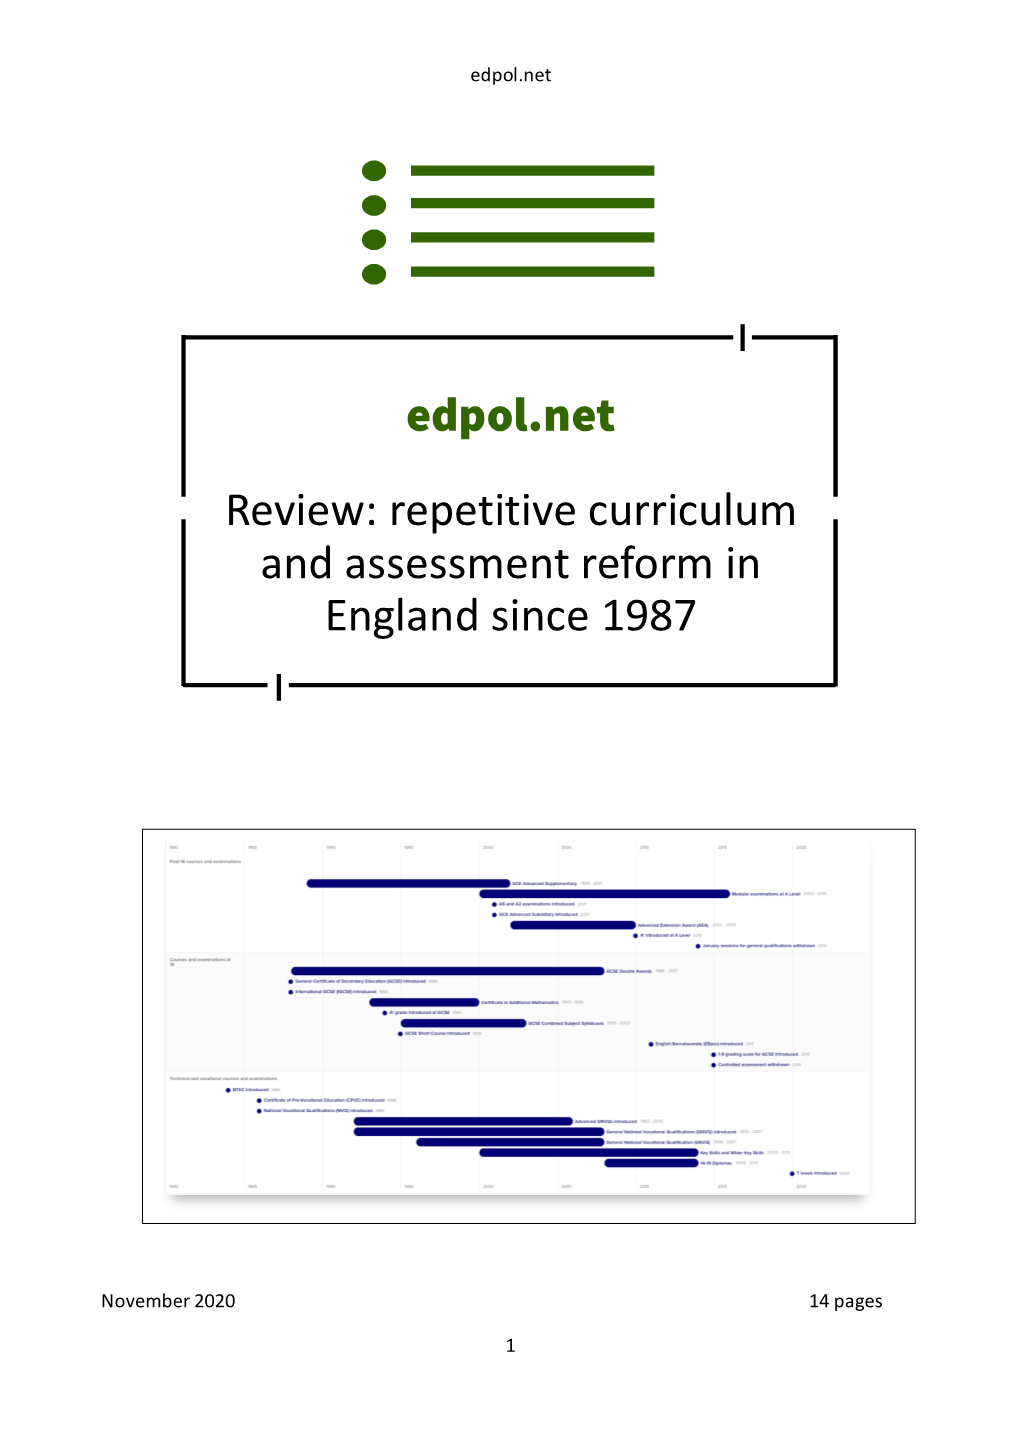 Review: Repetitive Curriculum and Assessment Reform in England Since 1987